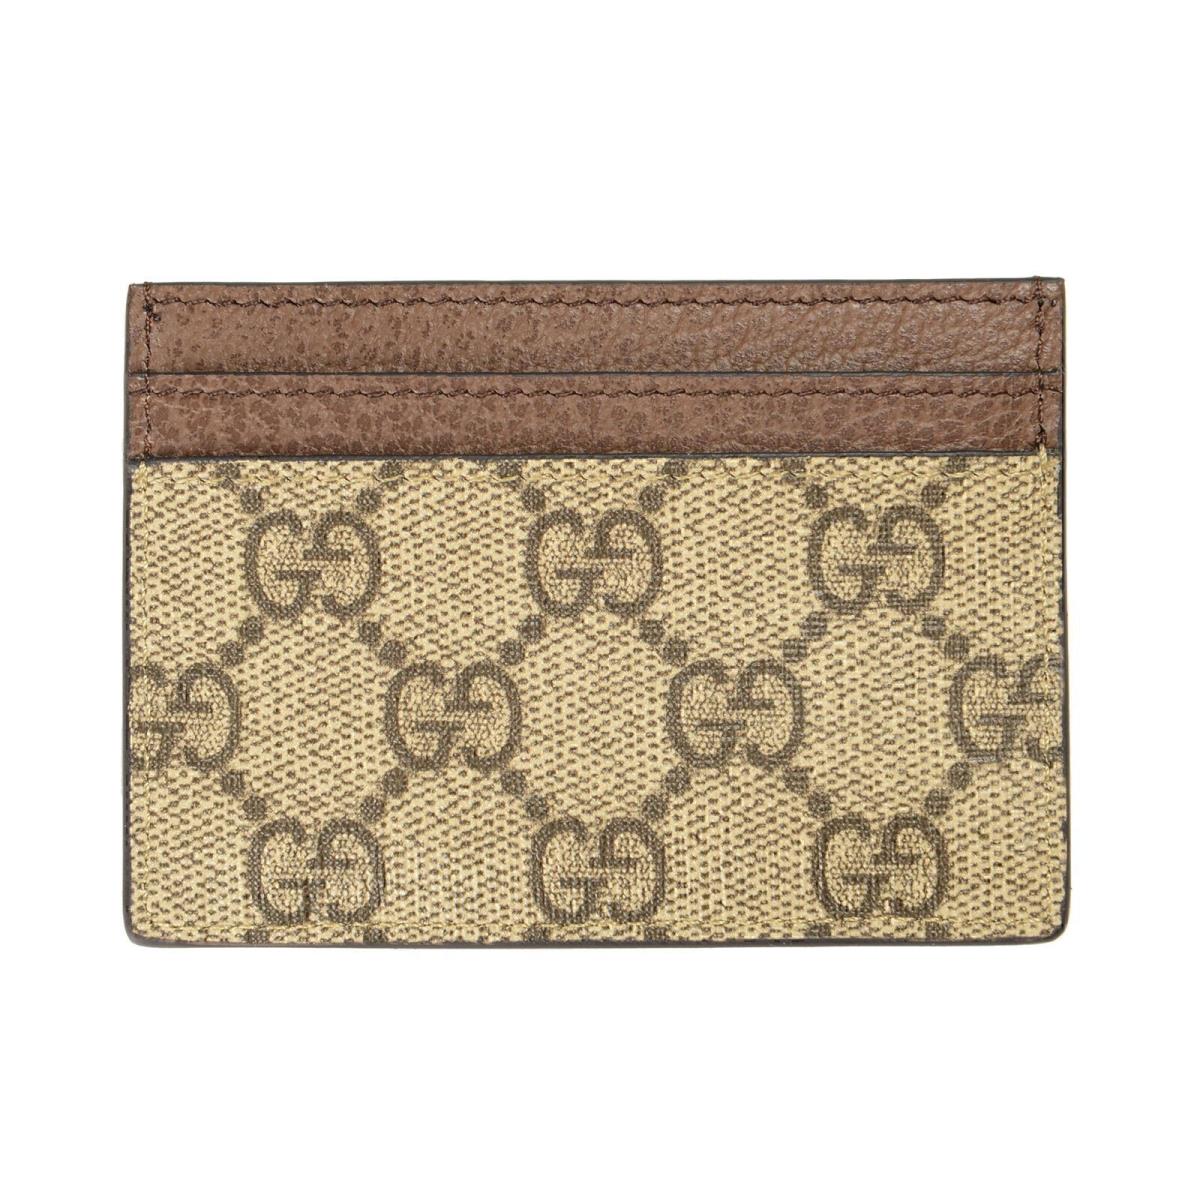 Gucci Leather Trimmed Ophidia GG Card Case